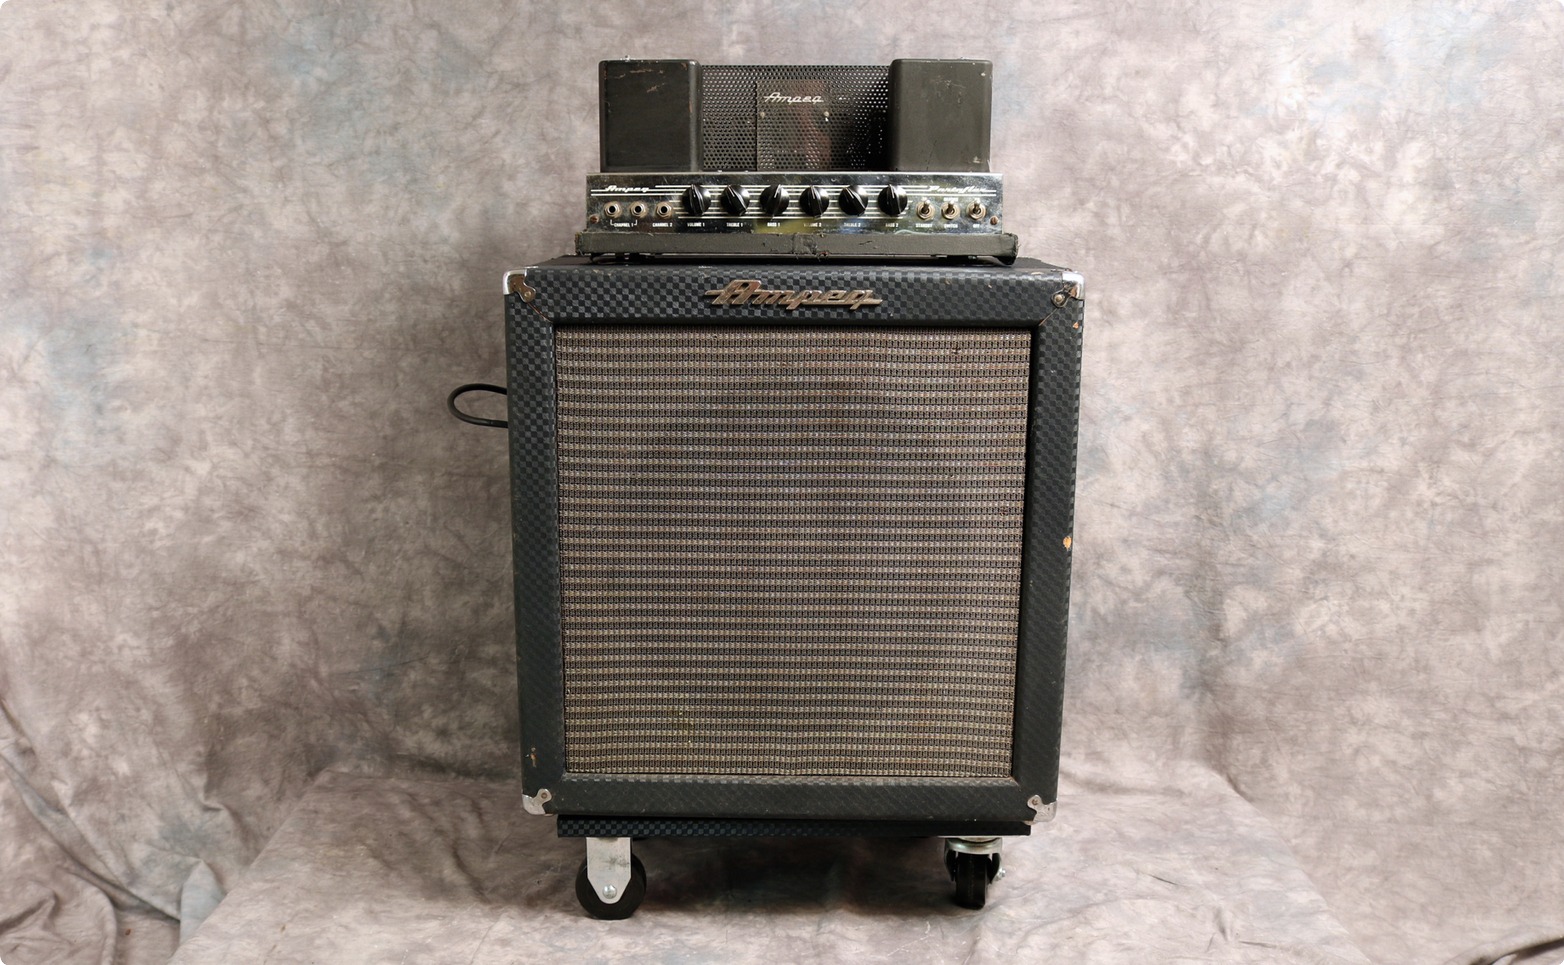 Ampeg B15 Nc 1963 Blue Checked Tolex Amp For Sale Andy Baxter Bass